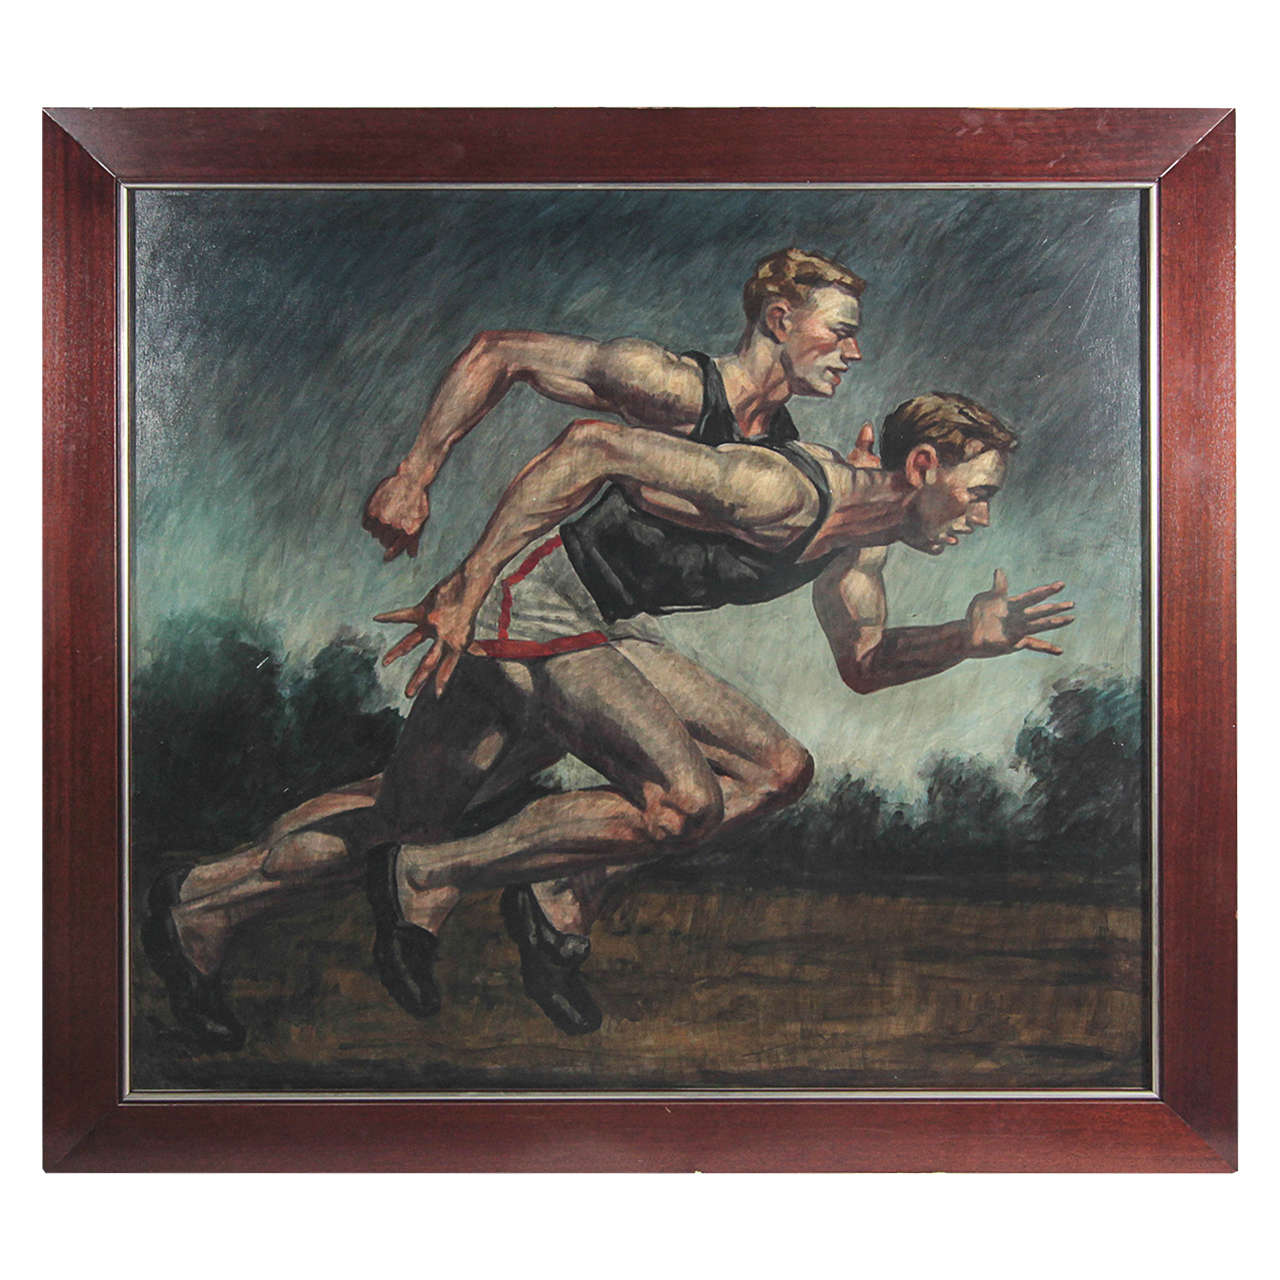 Untitled Runners by Mark Beard, Oil on Canvas